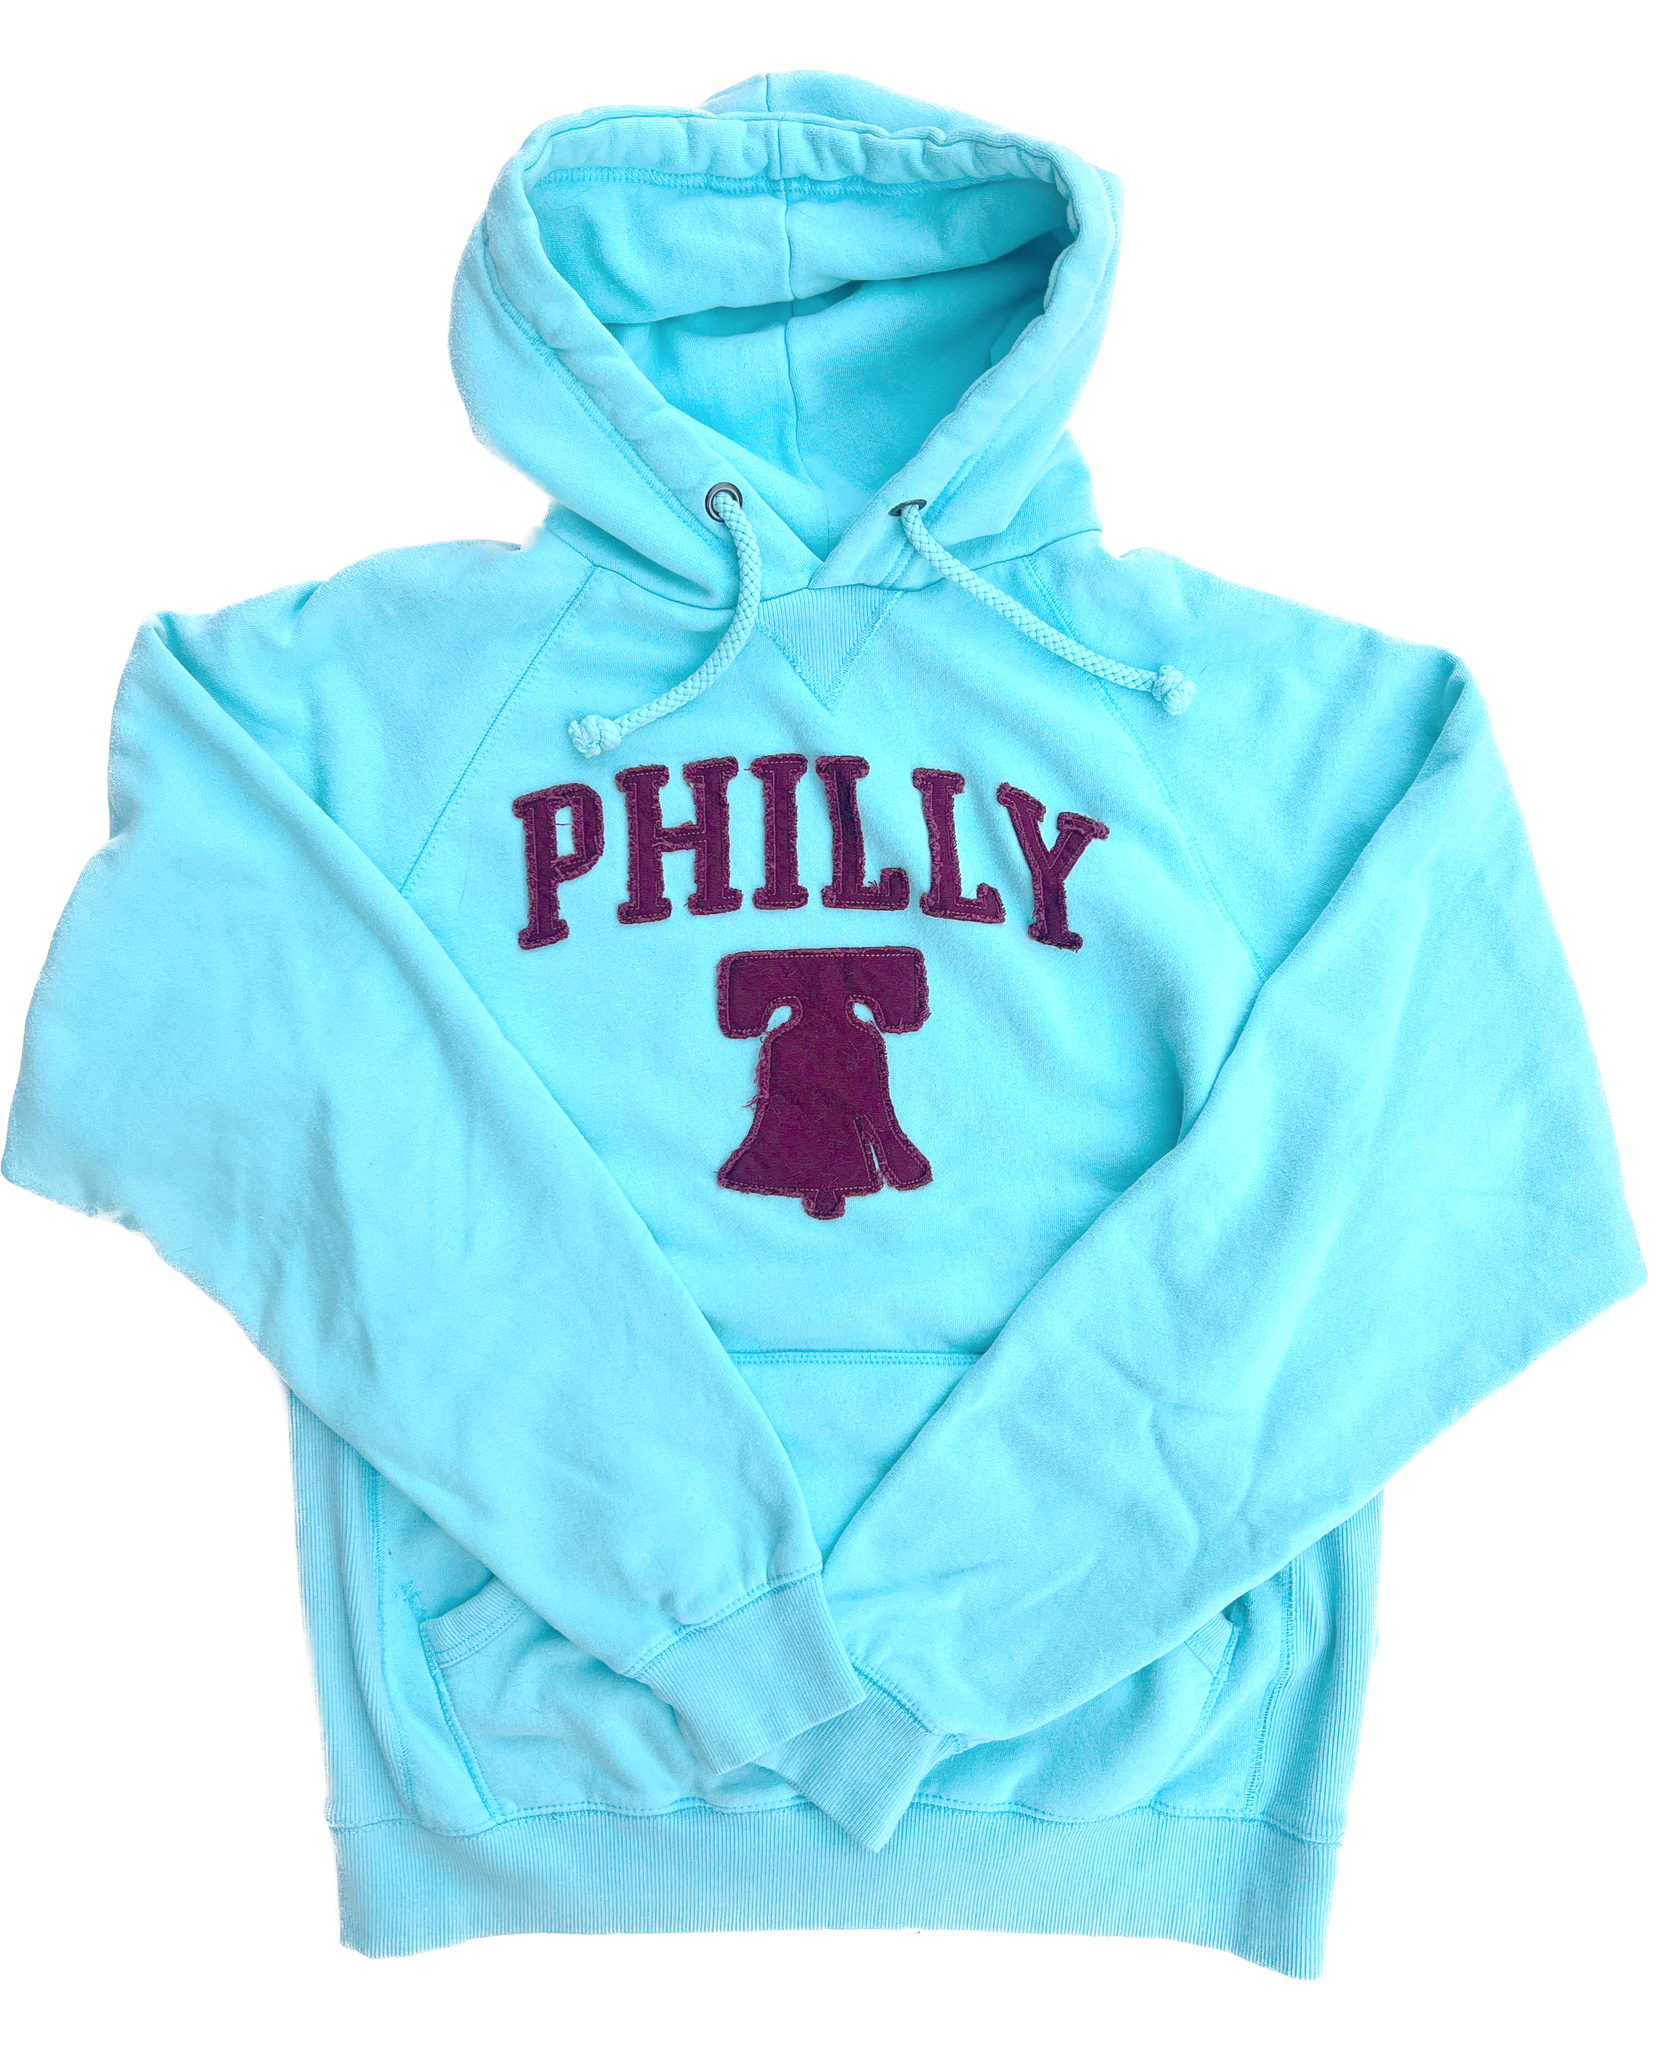 Philly Liberty Bell Hoodie - Phillies Light Blue/Maroon